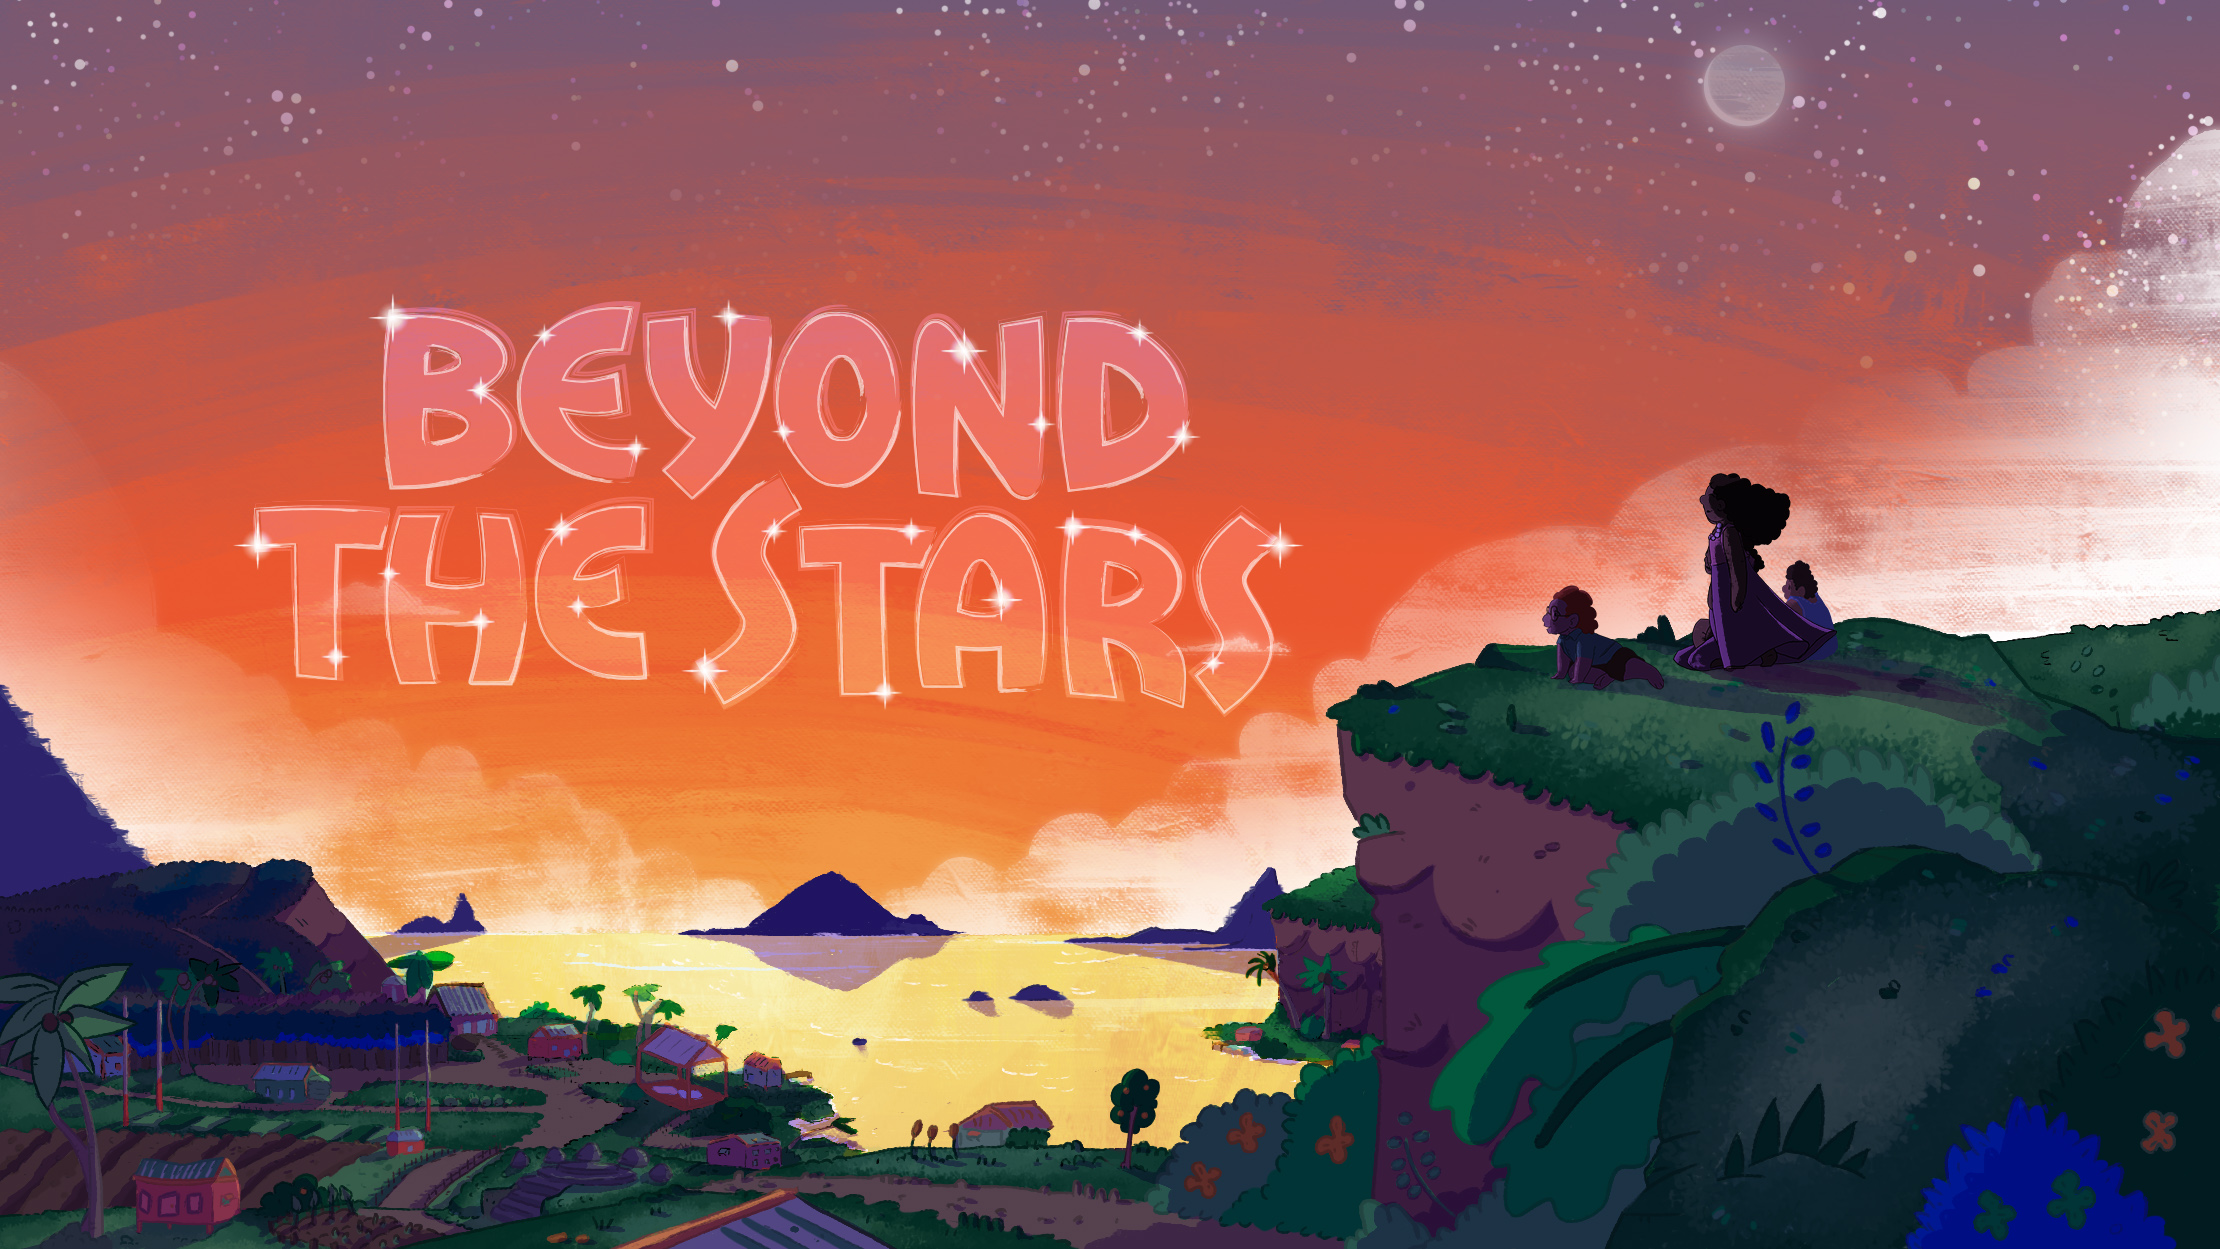 Beyond the Stars is an educational game that uses storytelling and interactive technologies